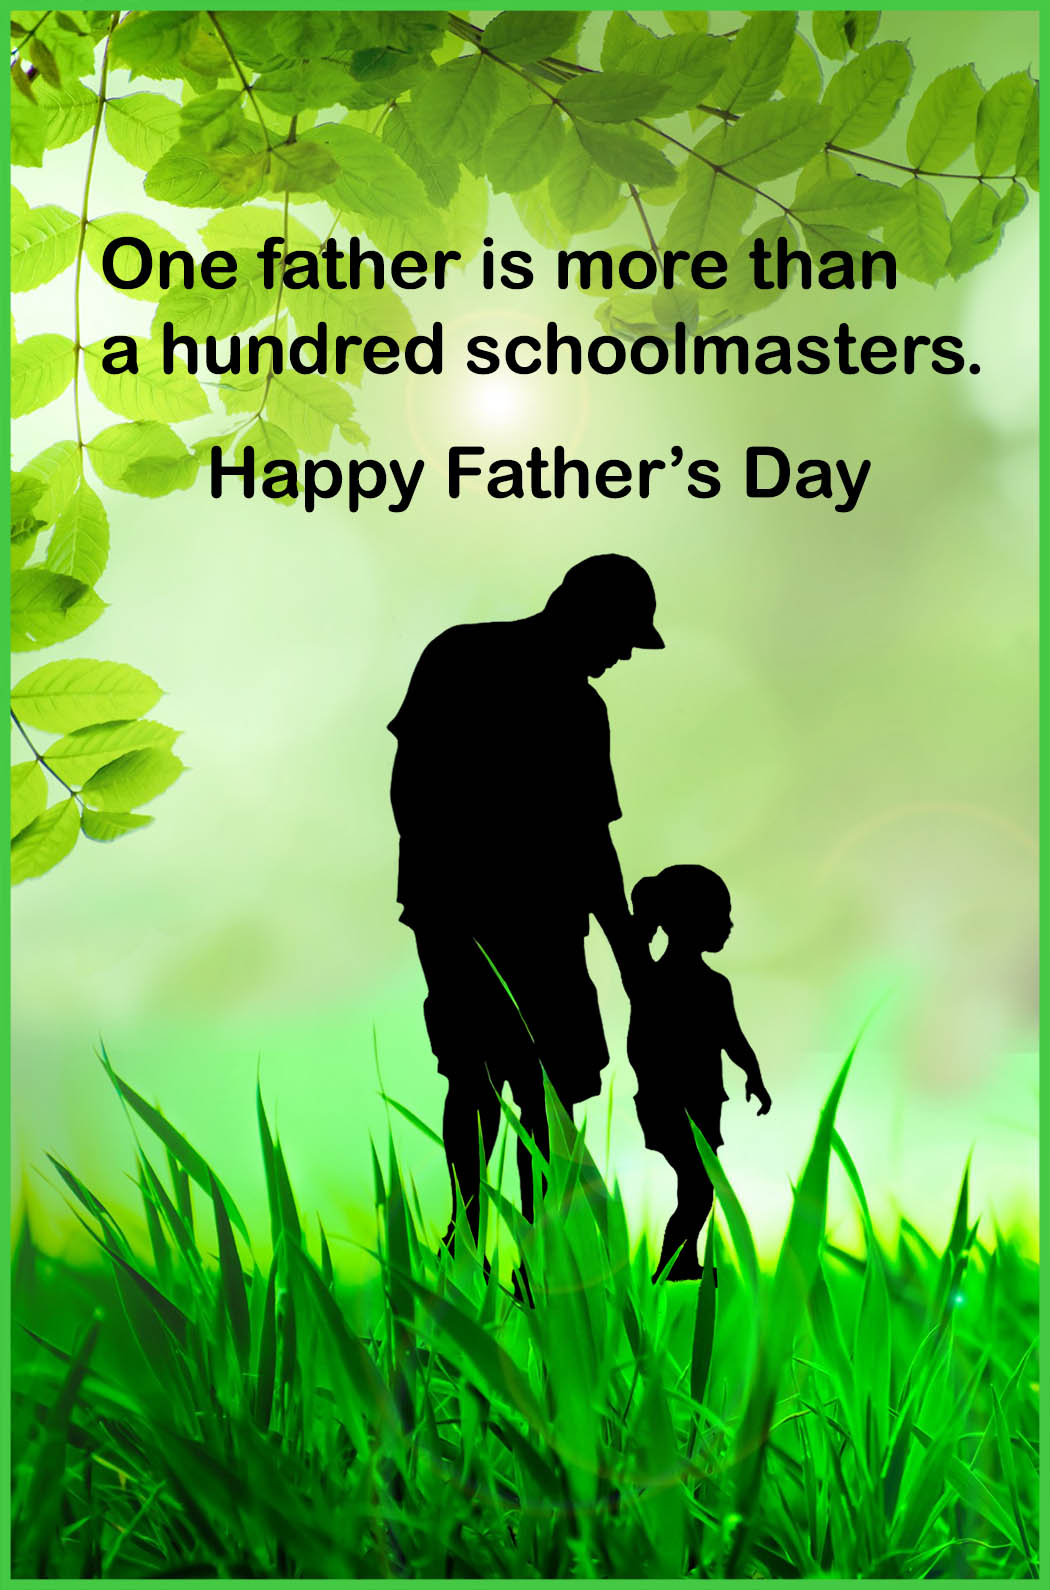 father-s-day-border-paper-and-father-s-day-stationary-father-s-day